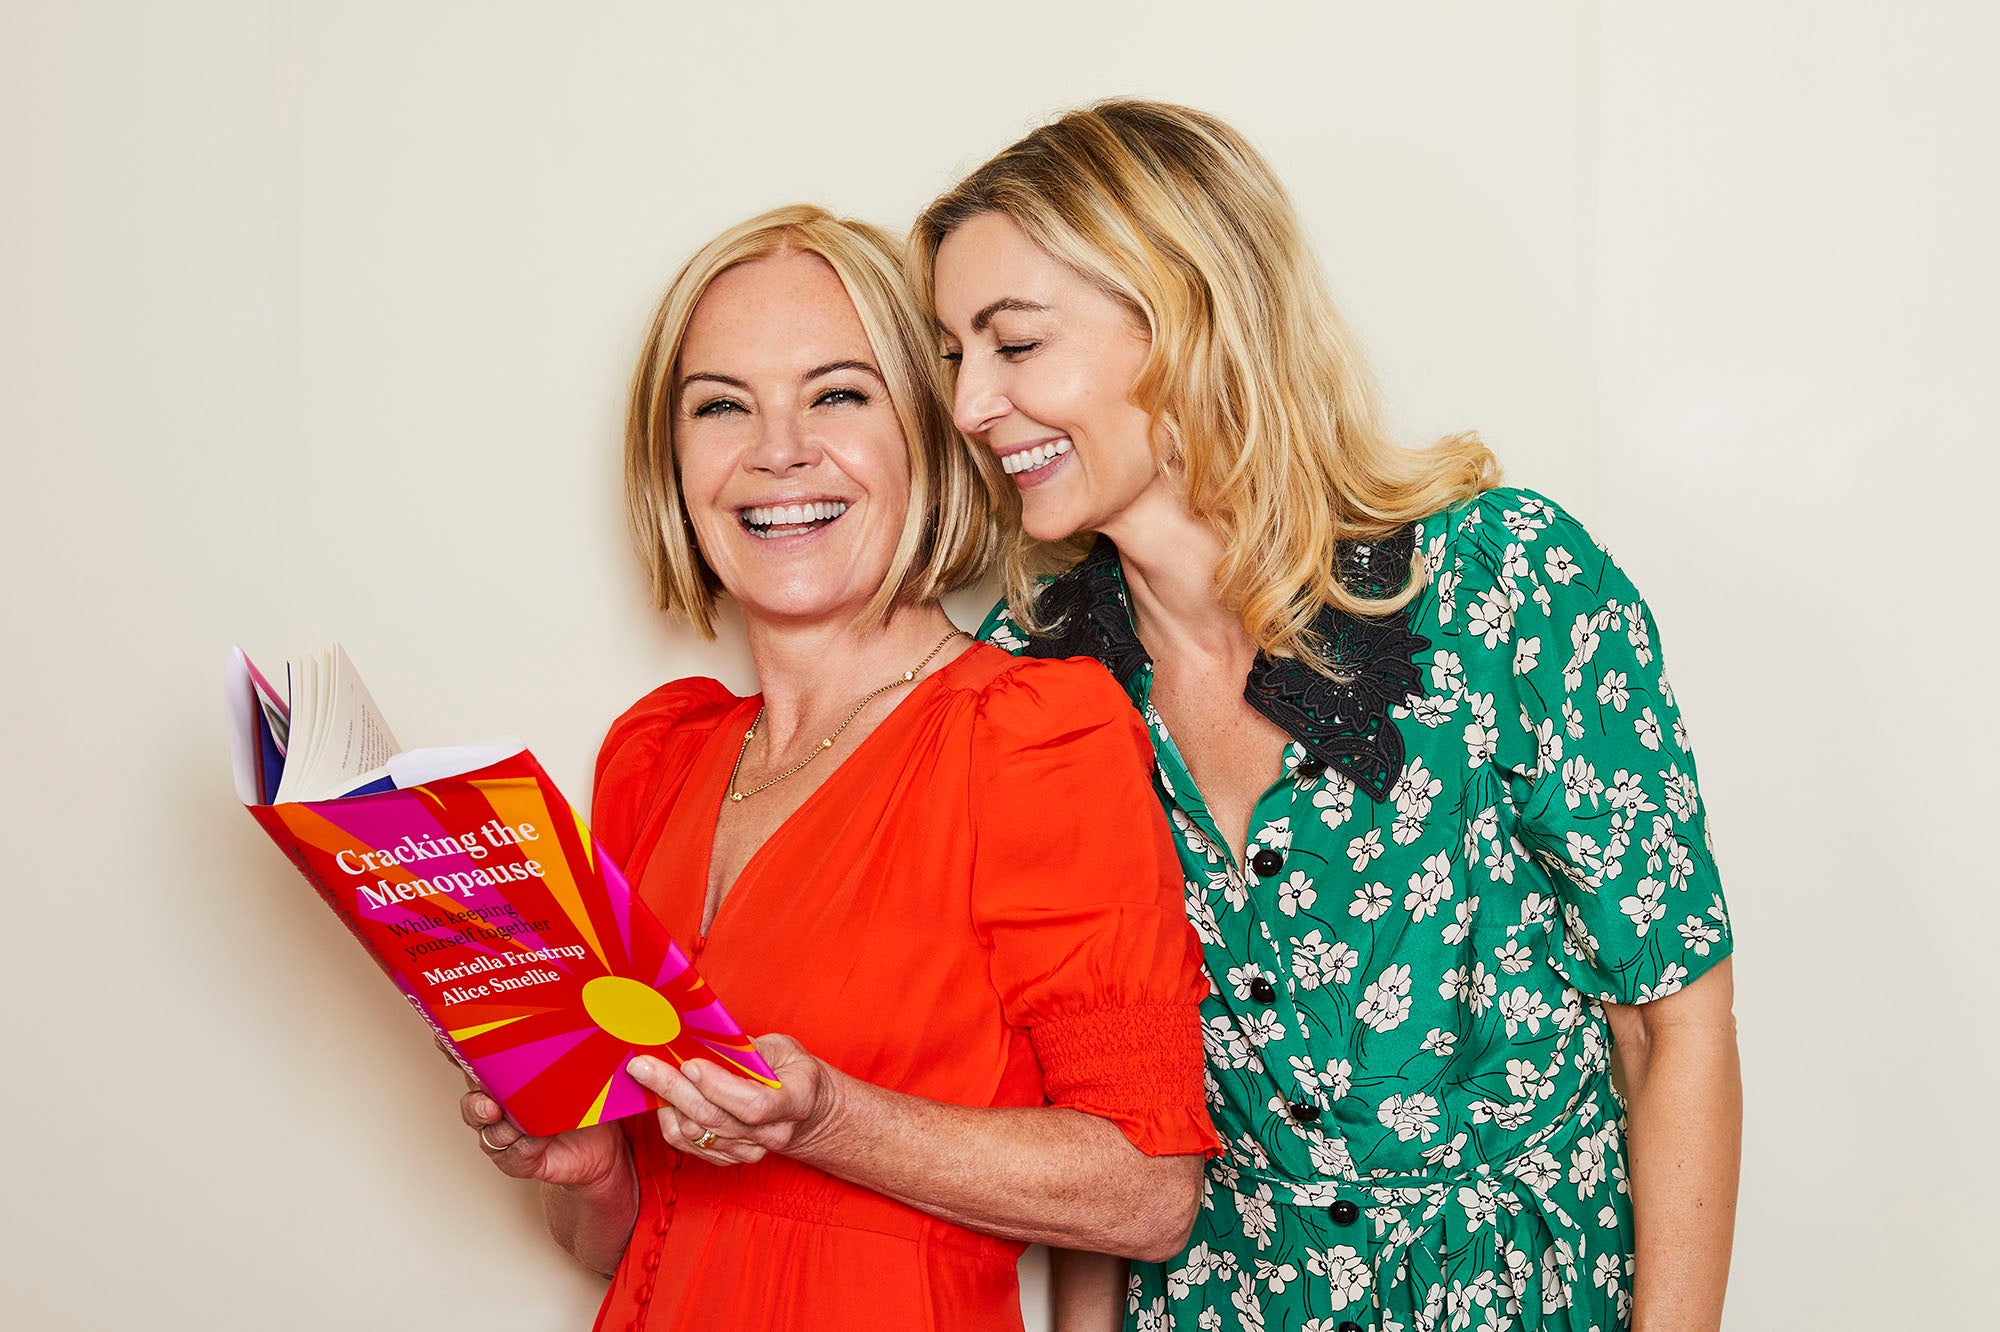 Mariella Frostrup and Alice Smellie laughing together holding their book Cracking the Menopause